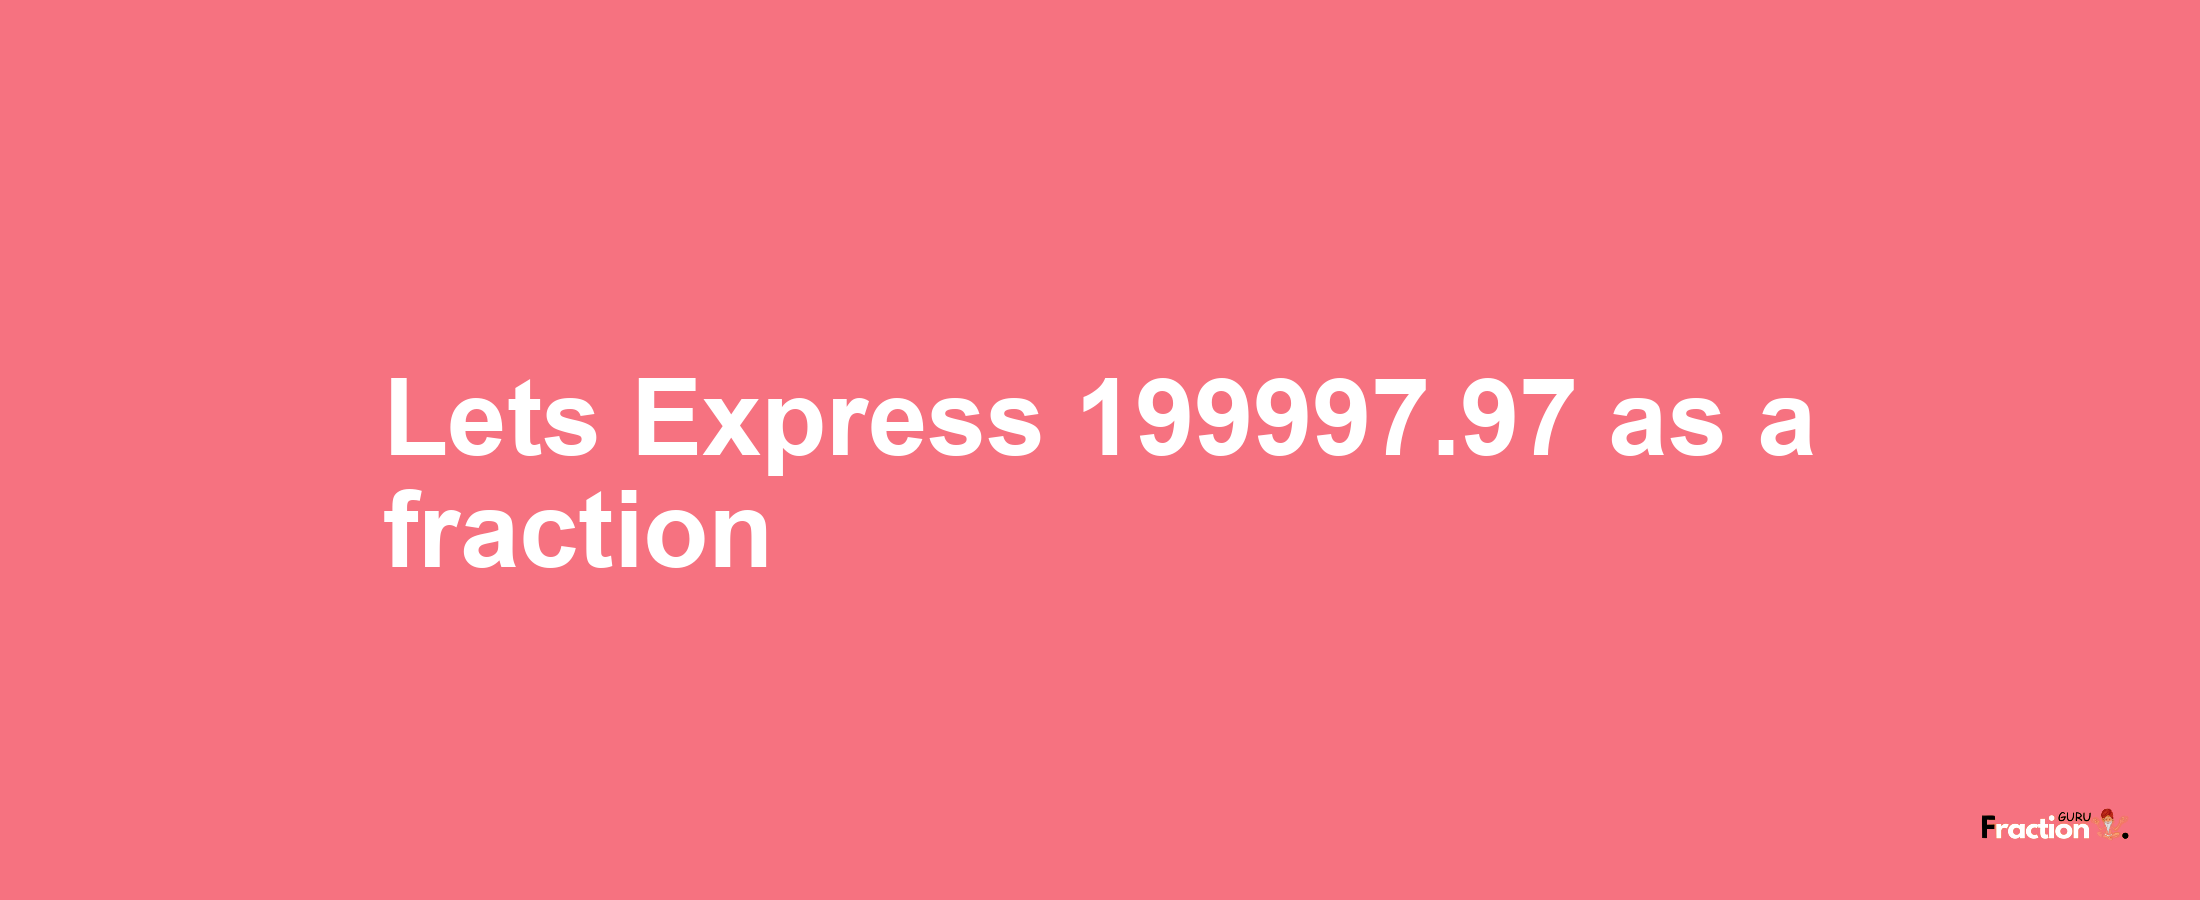 Lets Express 199997.97 as afraction